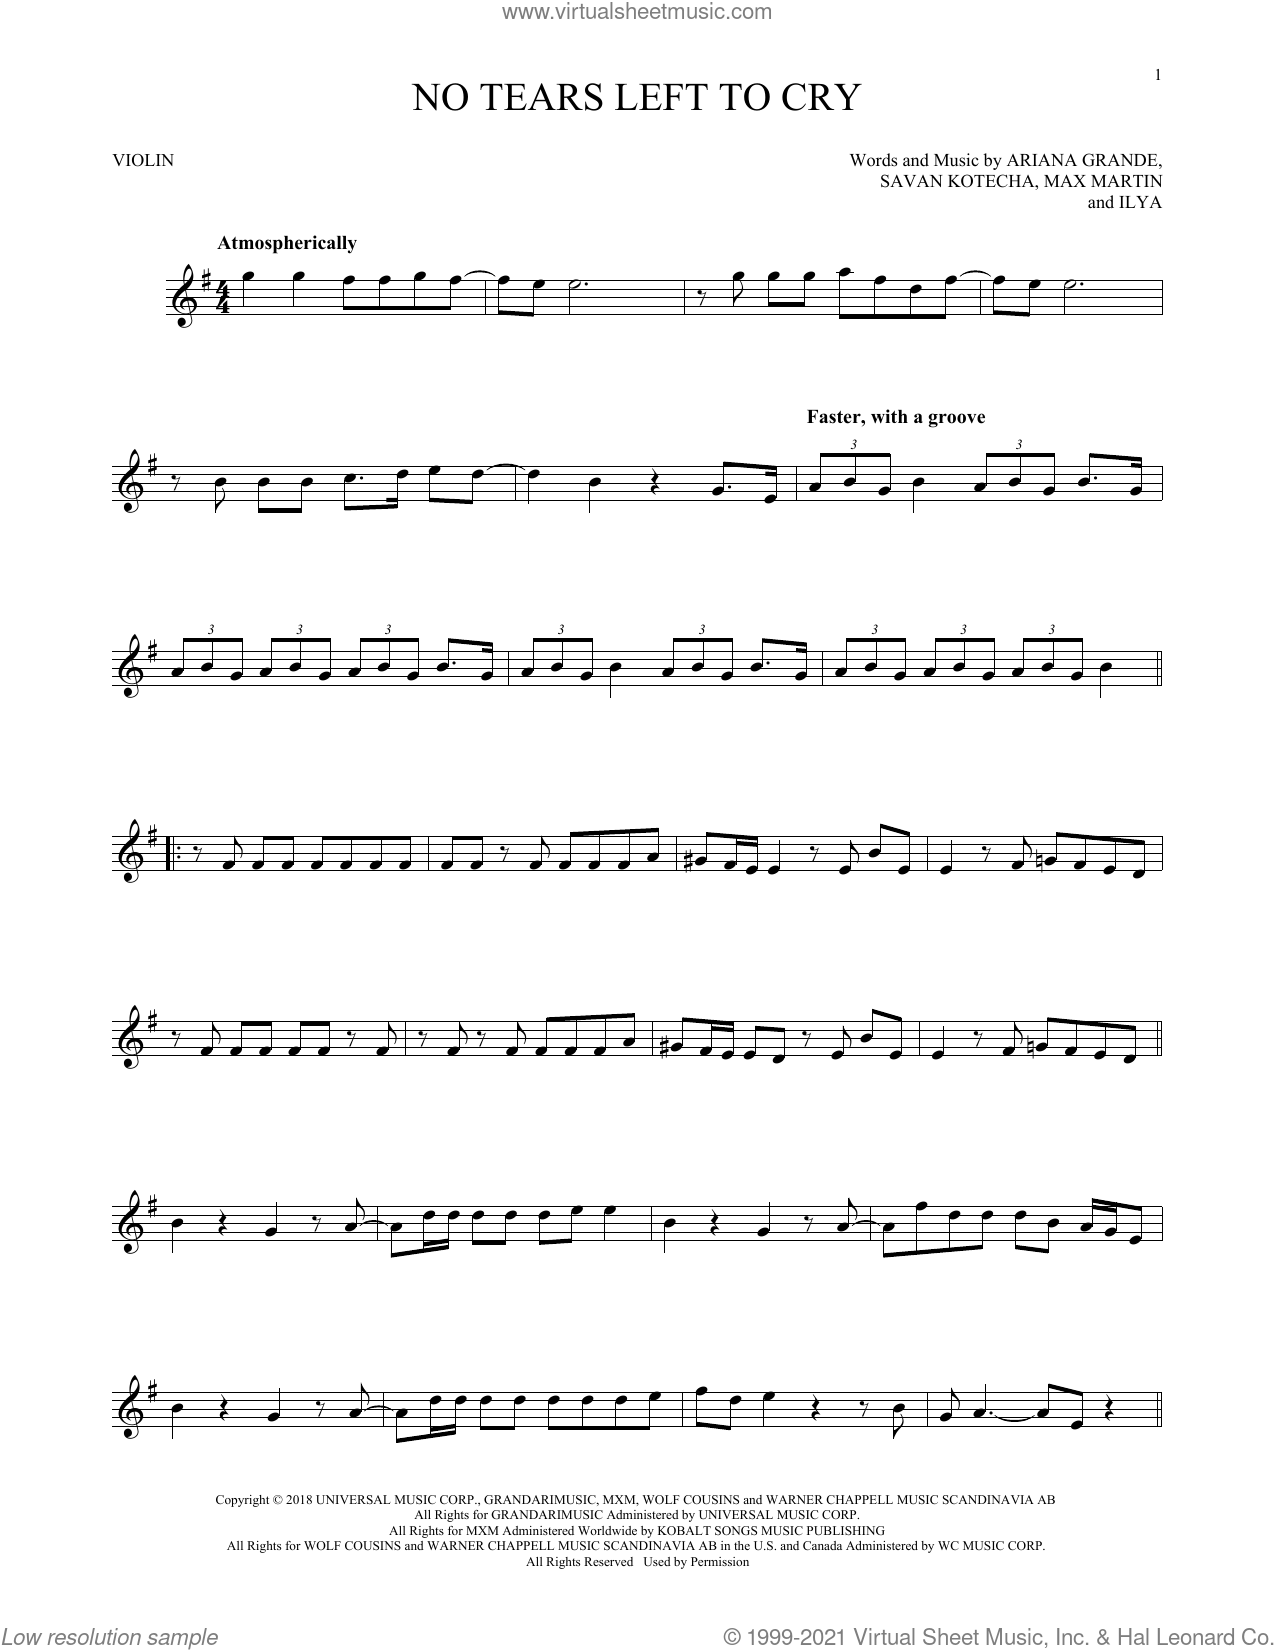 No Tears Left To Cry sheet music for violin solo